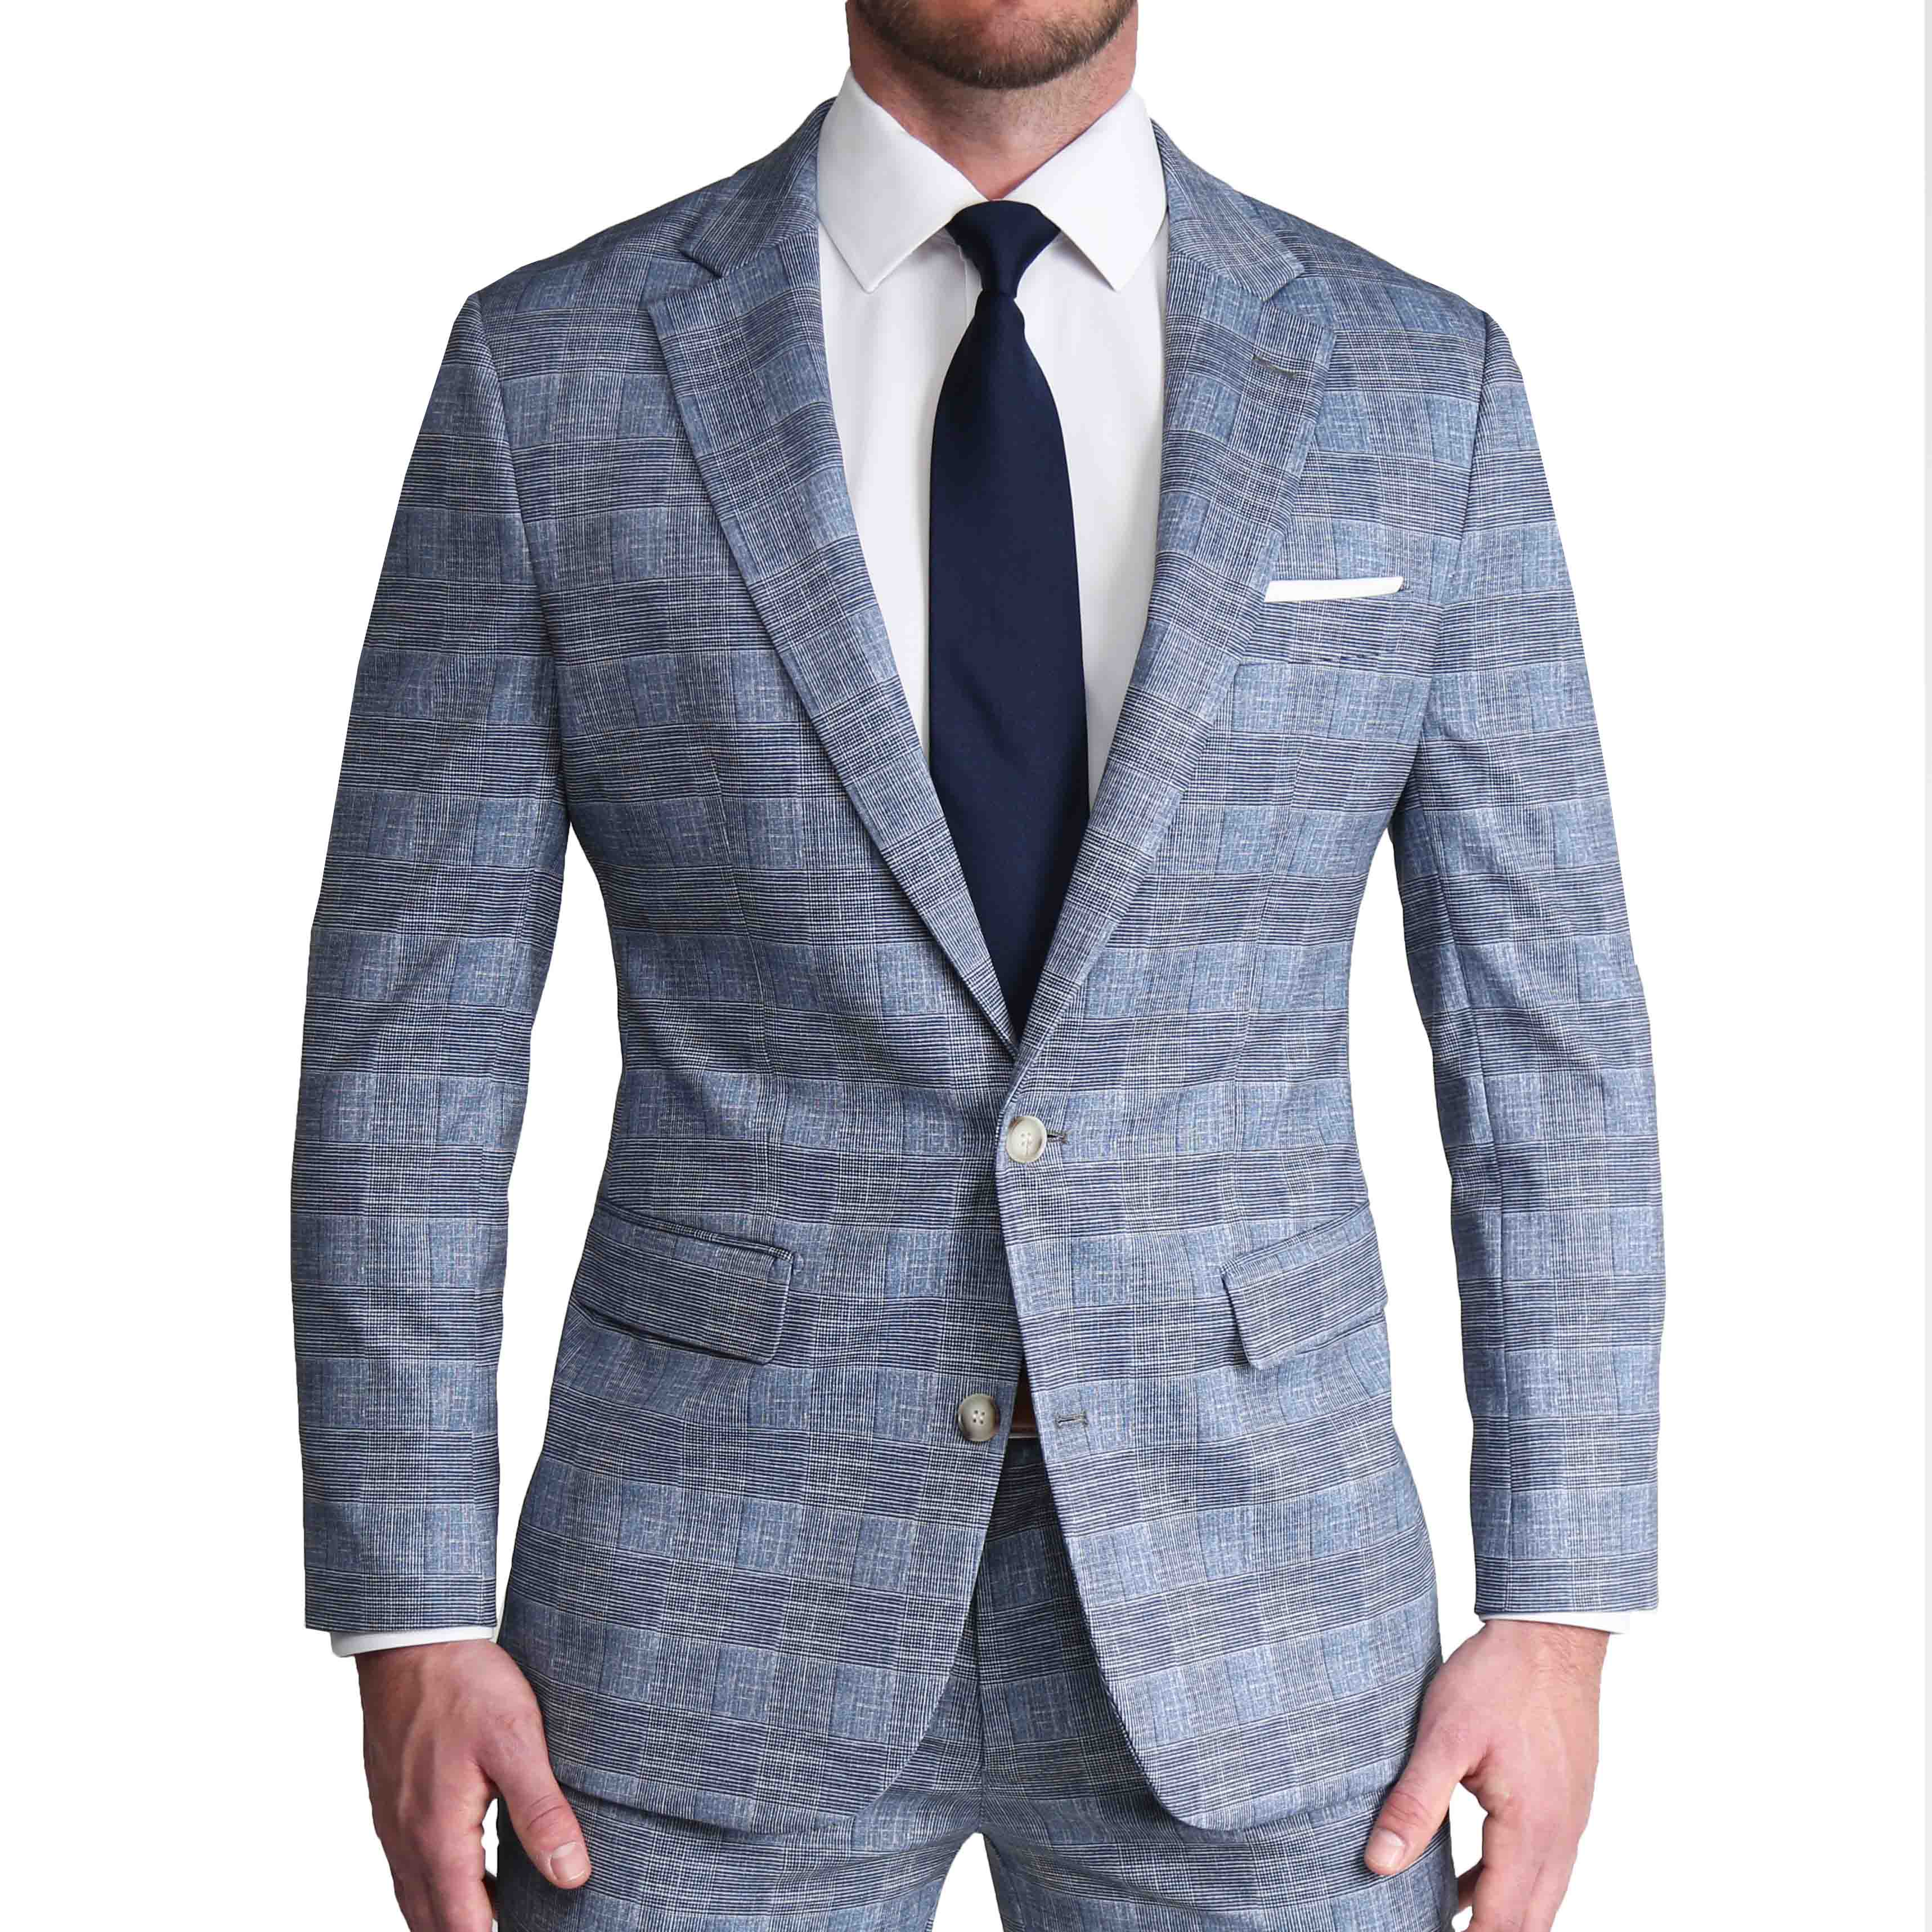 Athletic Fit Stretch Blazer - Knit Light Blue, Navy and White Plaid